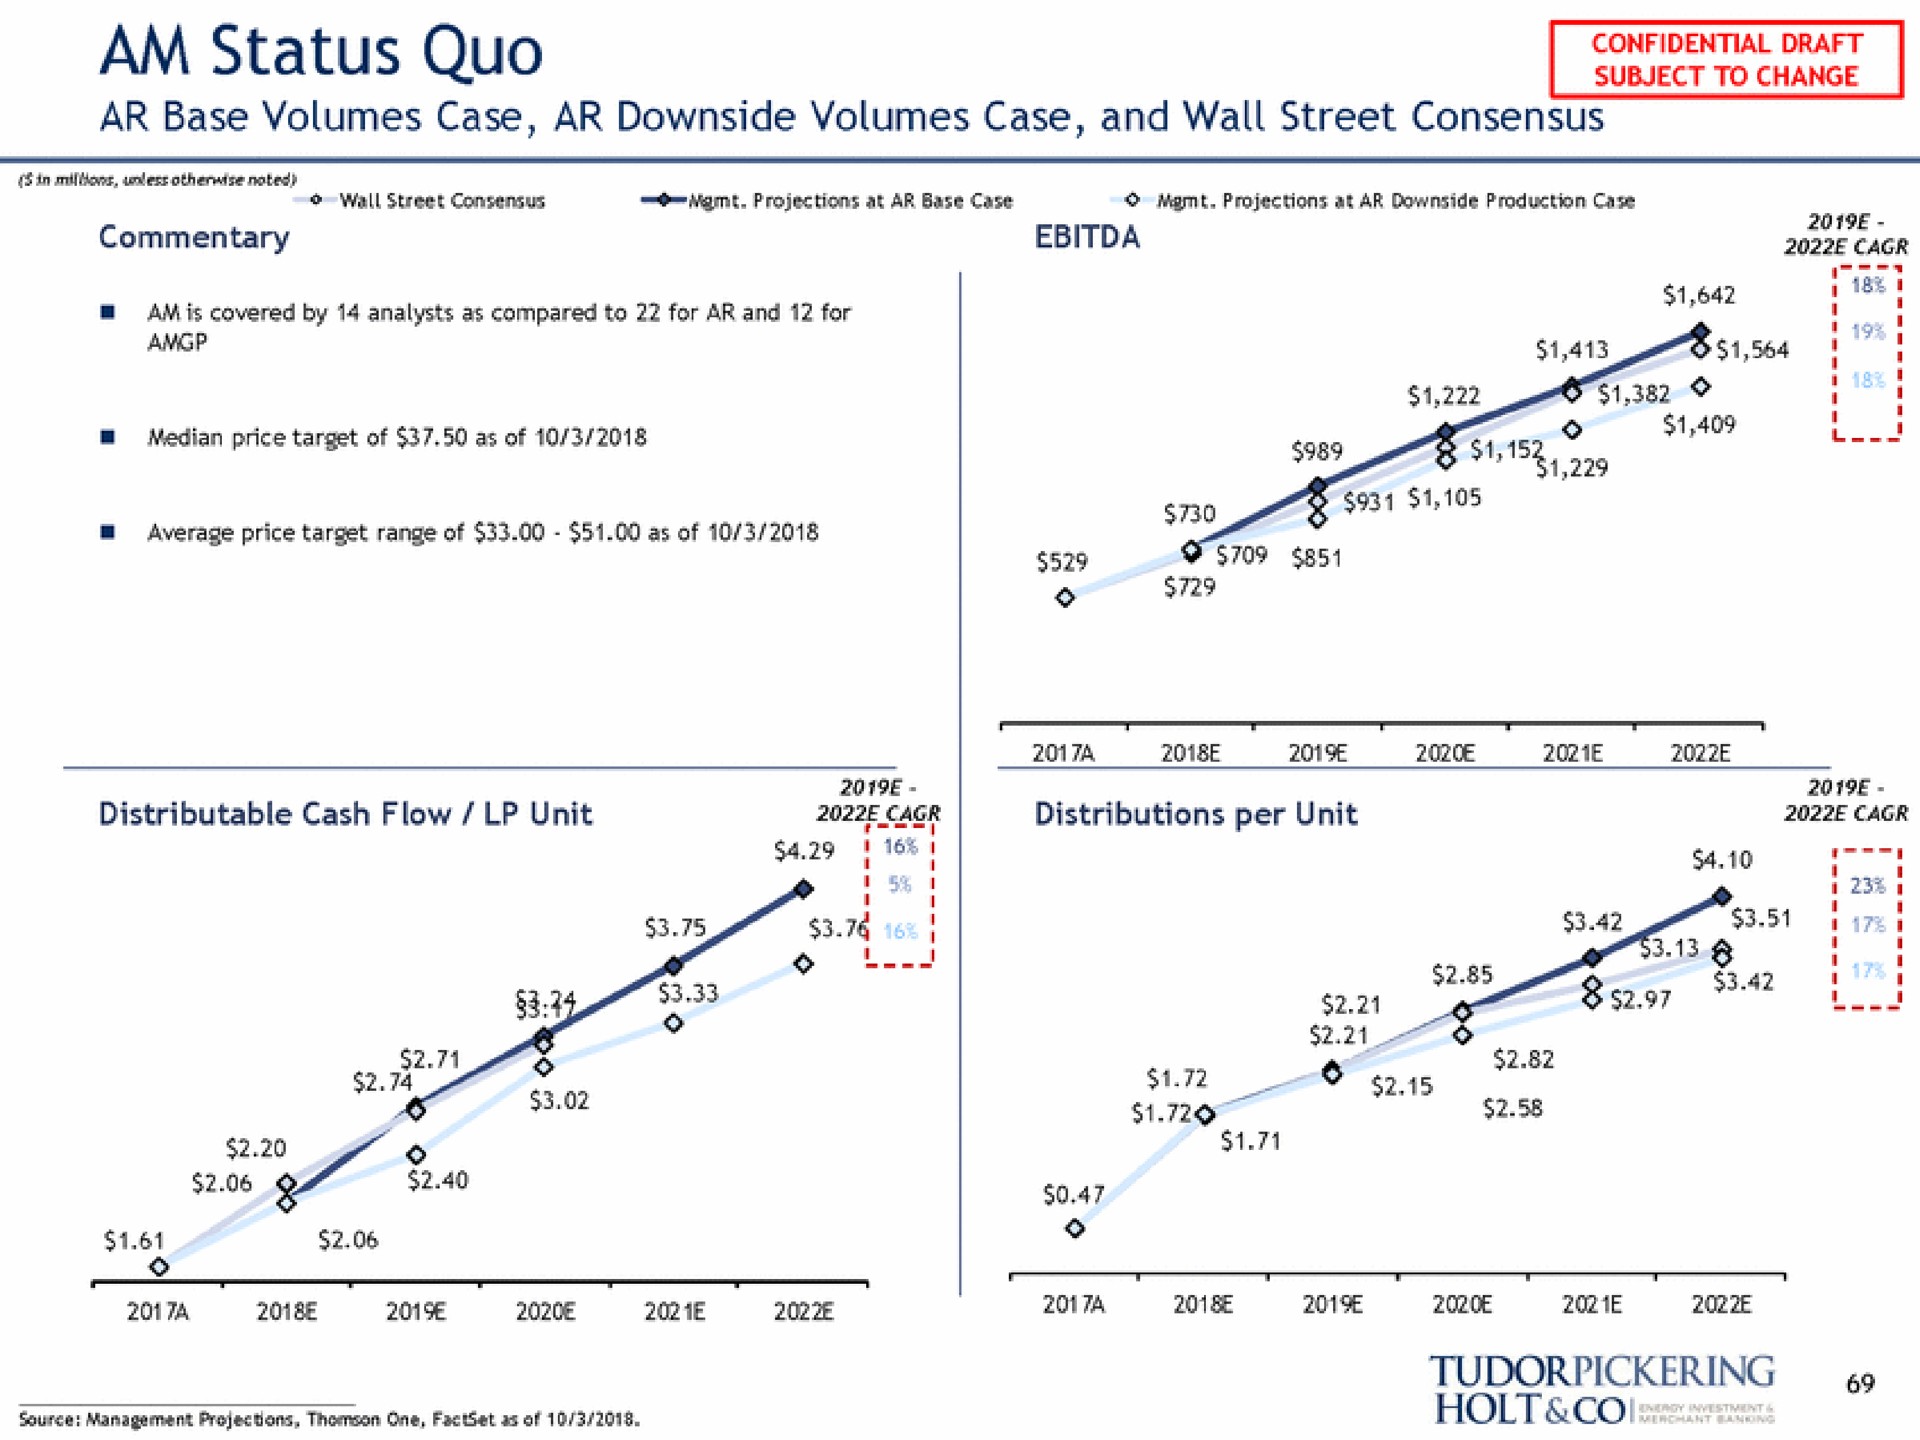 am status quo base volumes case downside volumes case and wall street consensus | Tudor, Pickering, Holt & Co